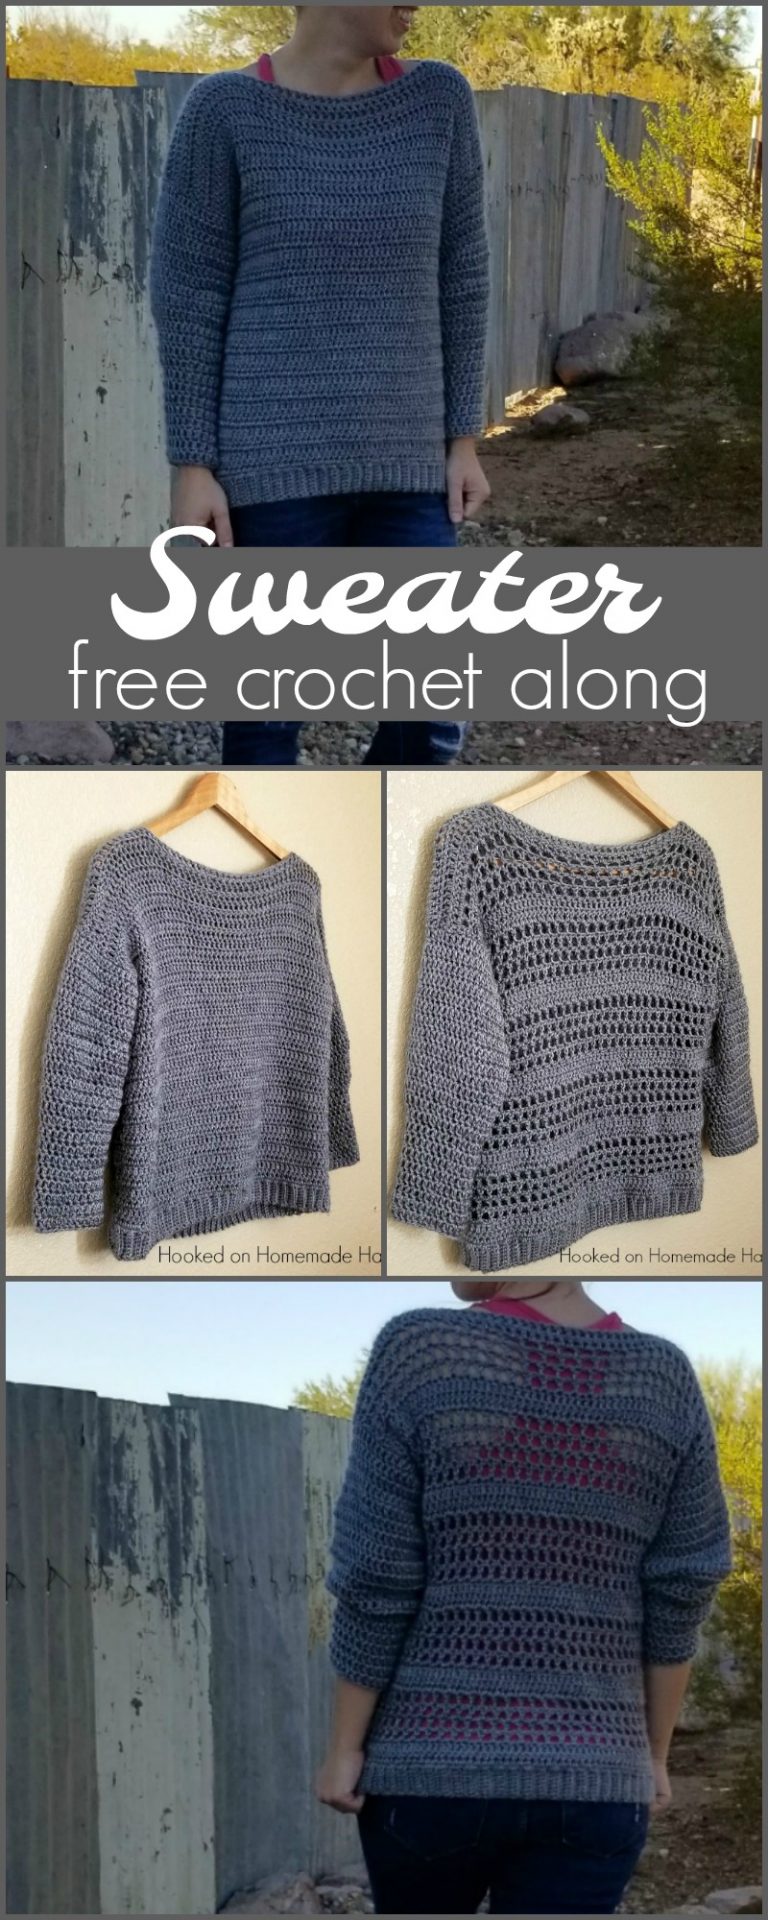 Sweater Crochet Along - Hooked on Homemade Happiness